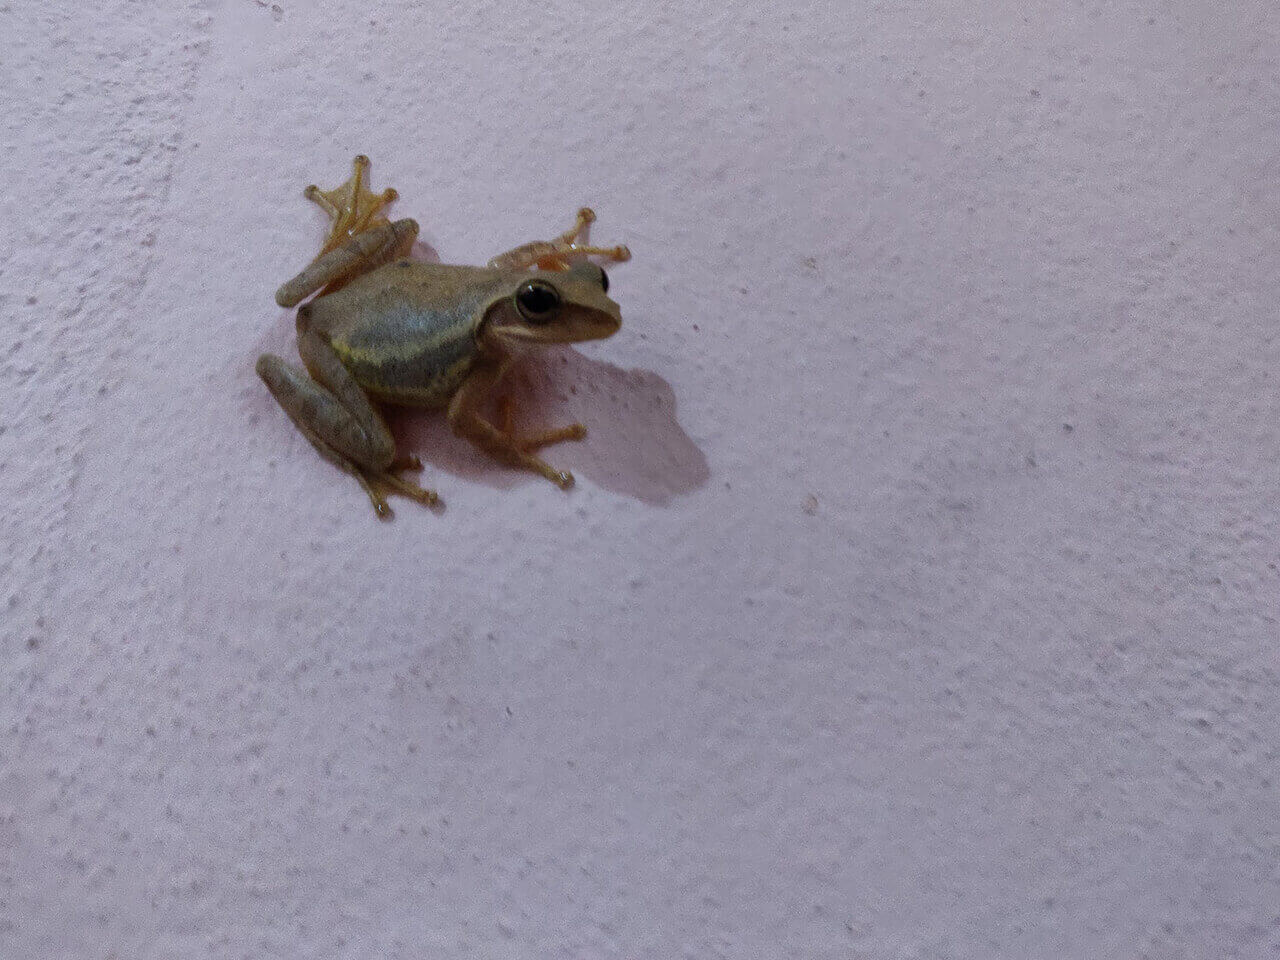 A tree frog, they have long limbs with even longer toes.